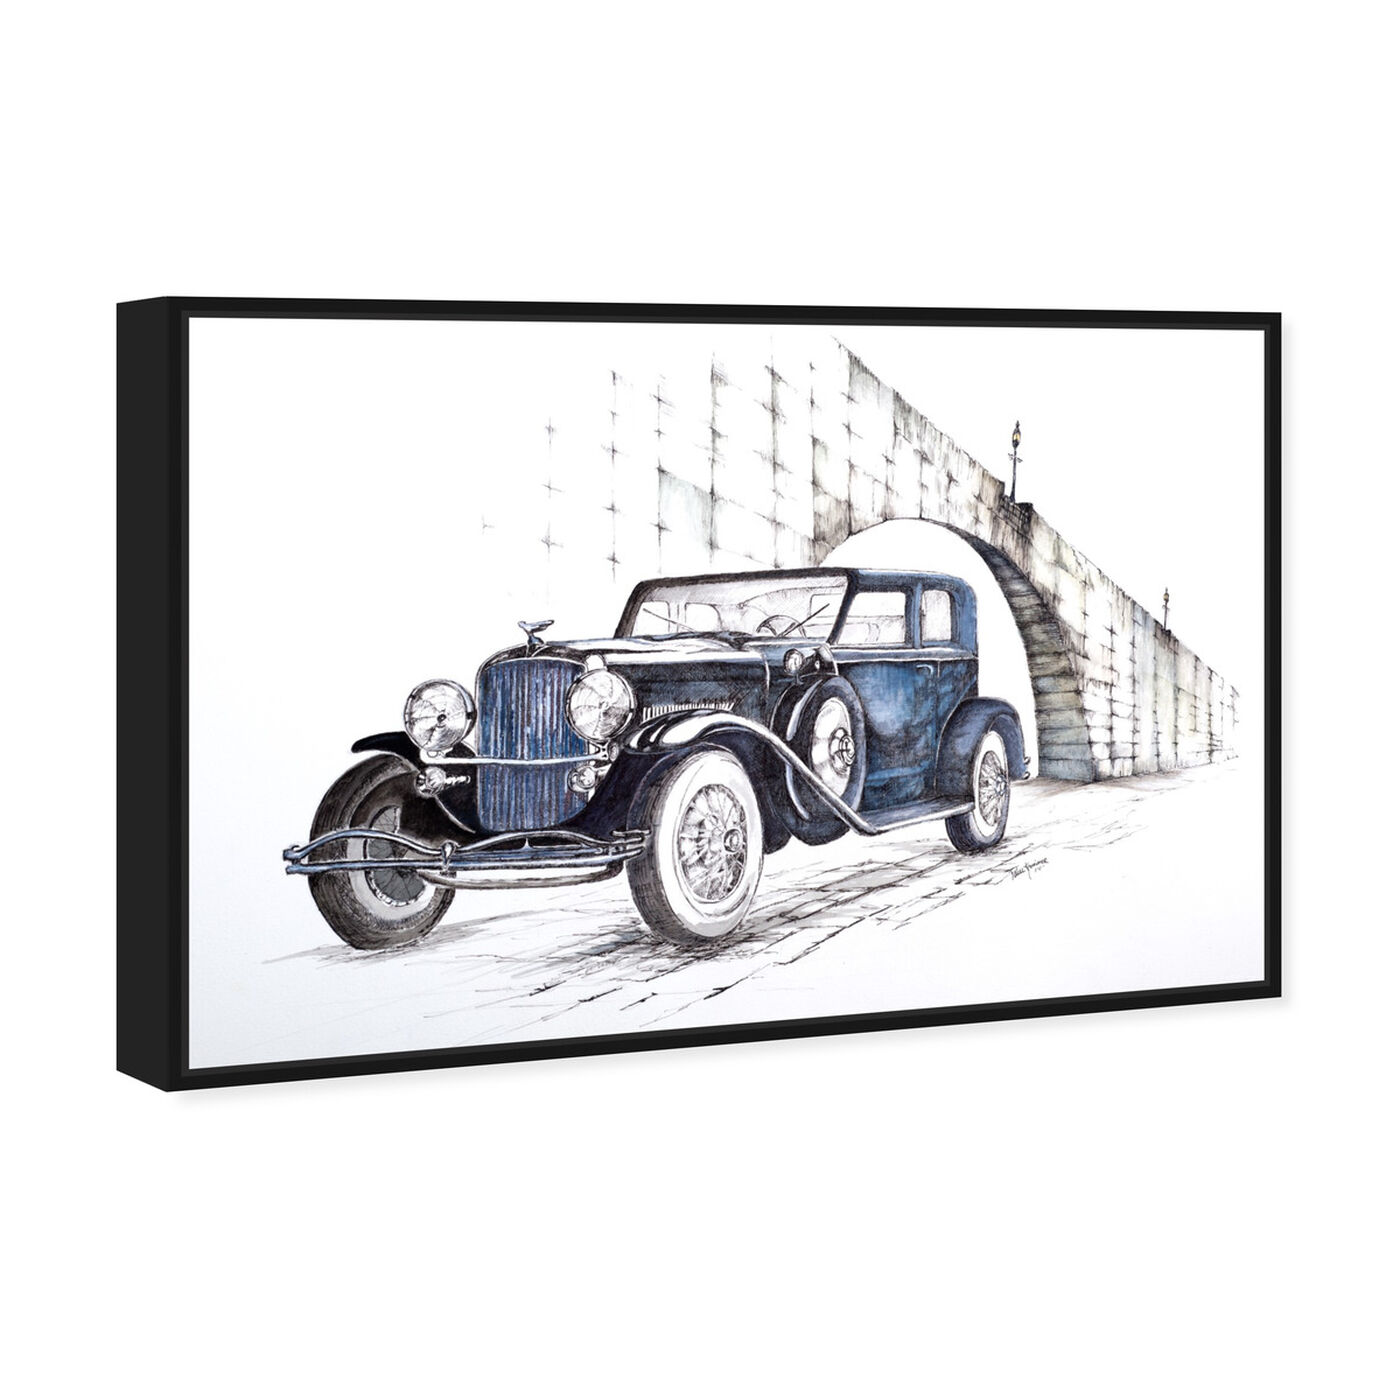 Angled view of Paul Kaminer - 1930 Duesenberg Town Car featuring transportation and automobiles art.